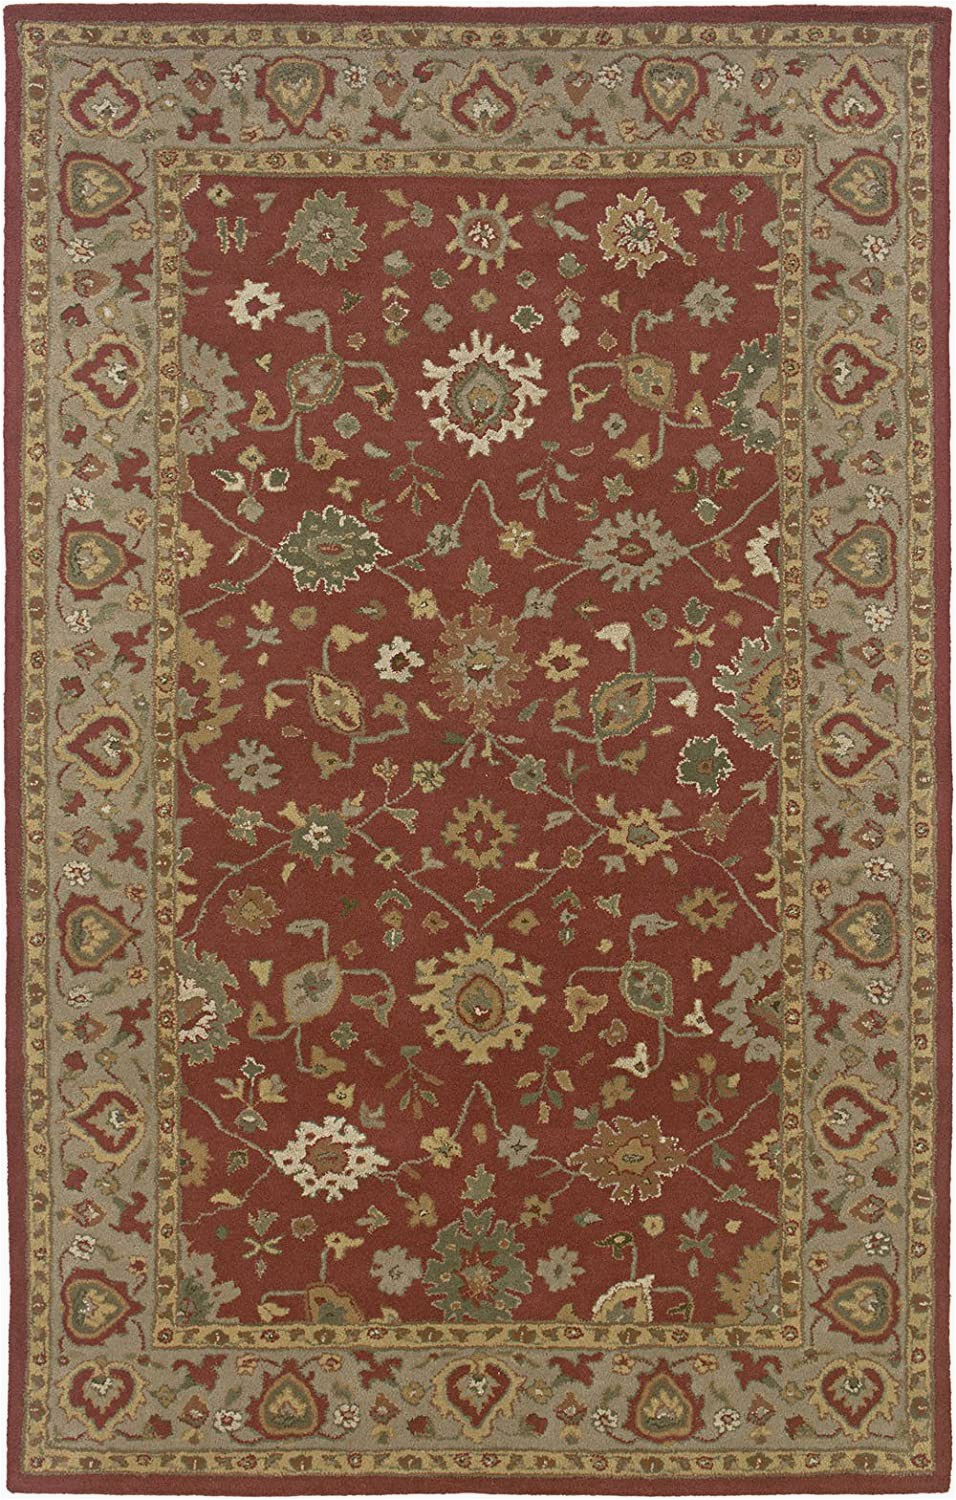 8 Foot Square area Rug Rizzy Home Ju0089 Jubilee 8 Feet by 8 Feet Square area Rug